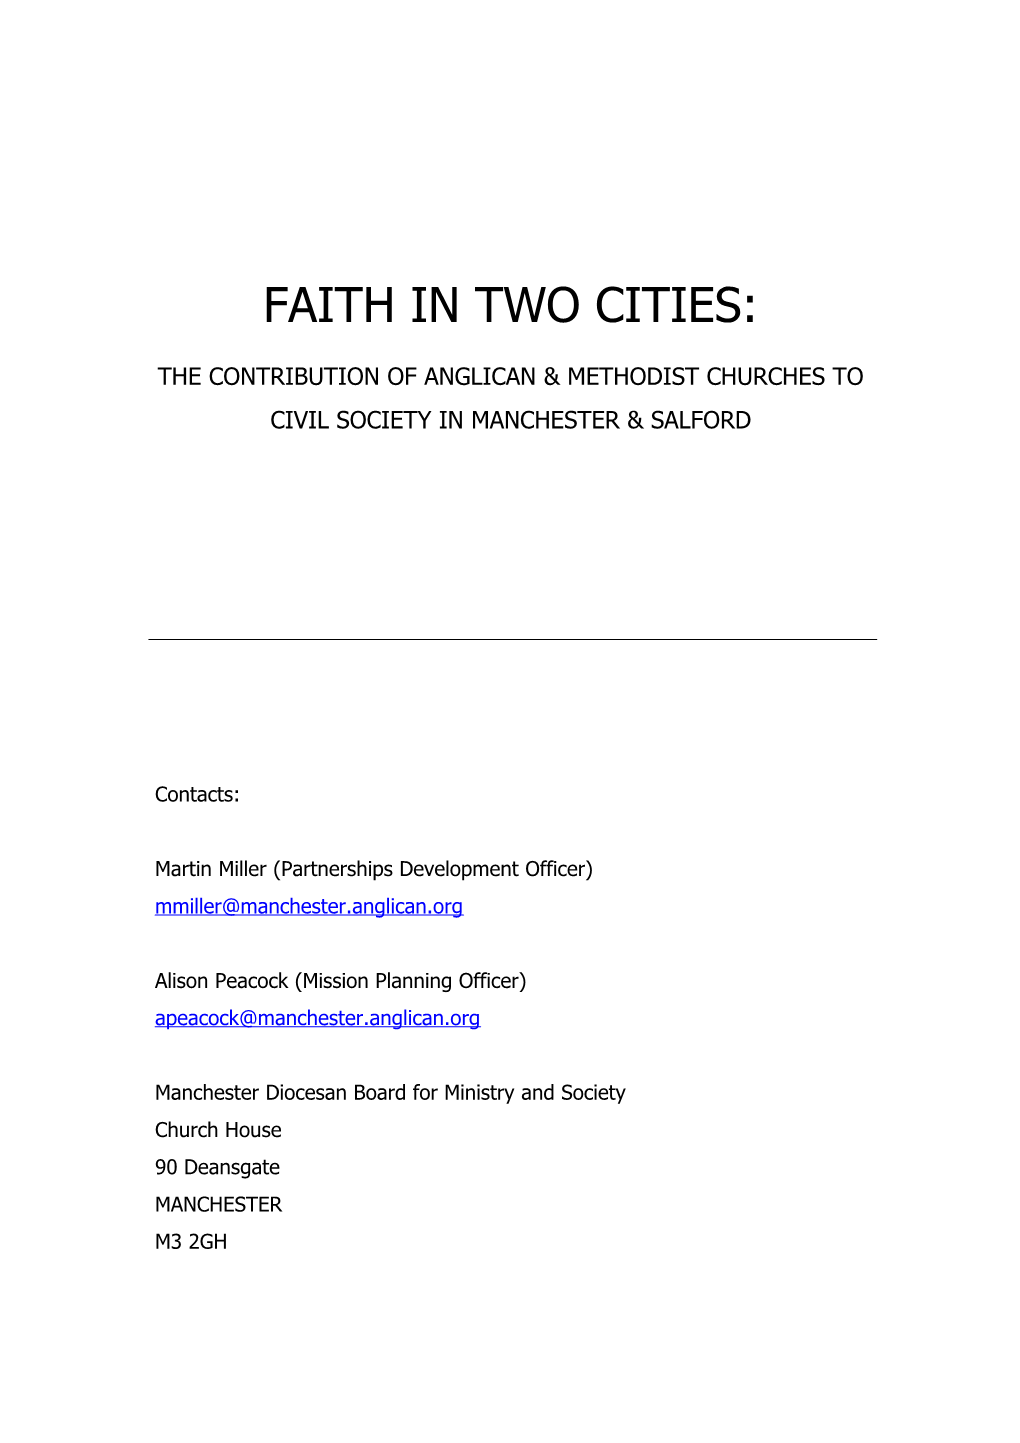 The Contribution of Anglican & Methodist Churches to Civil Society in Manchester & Salford